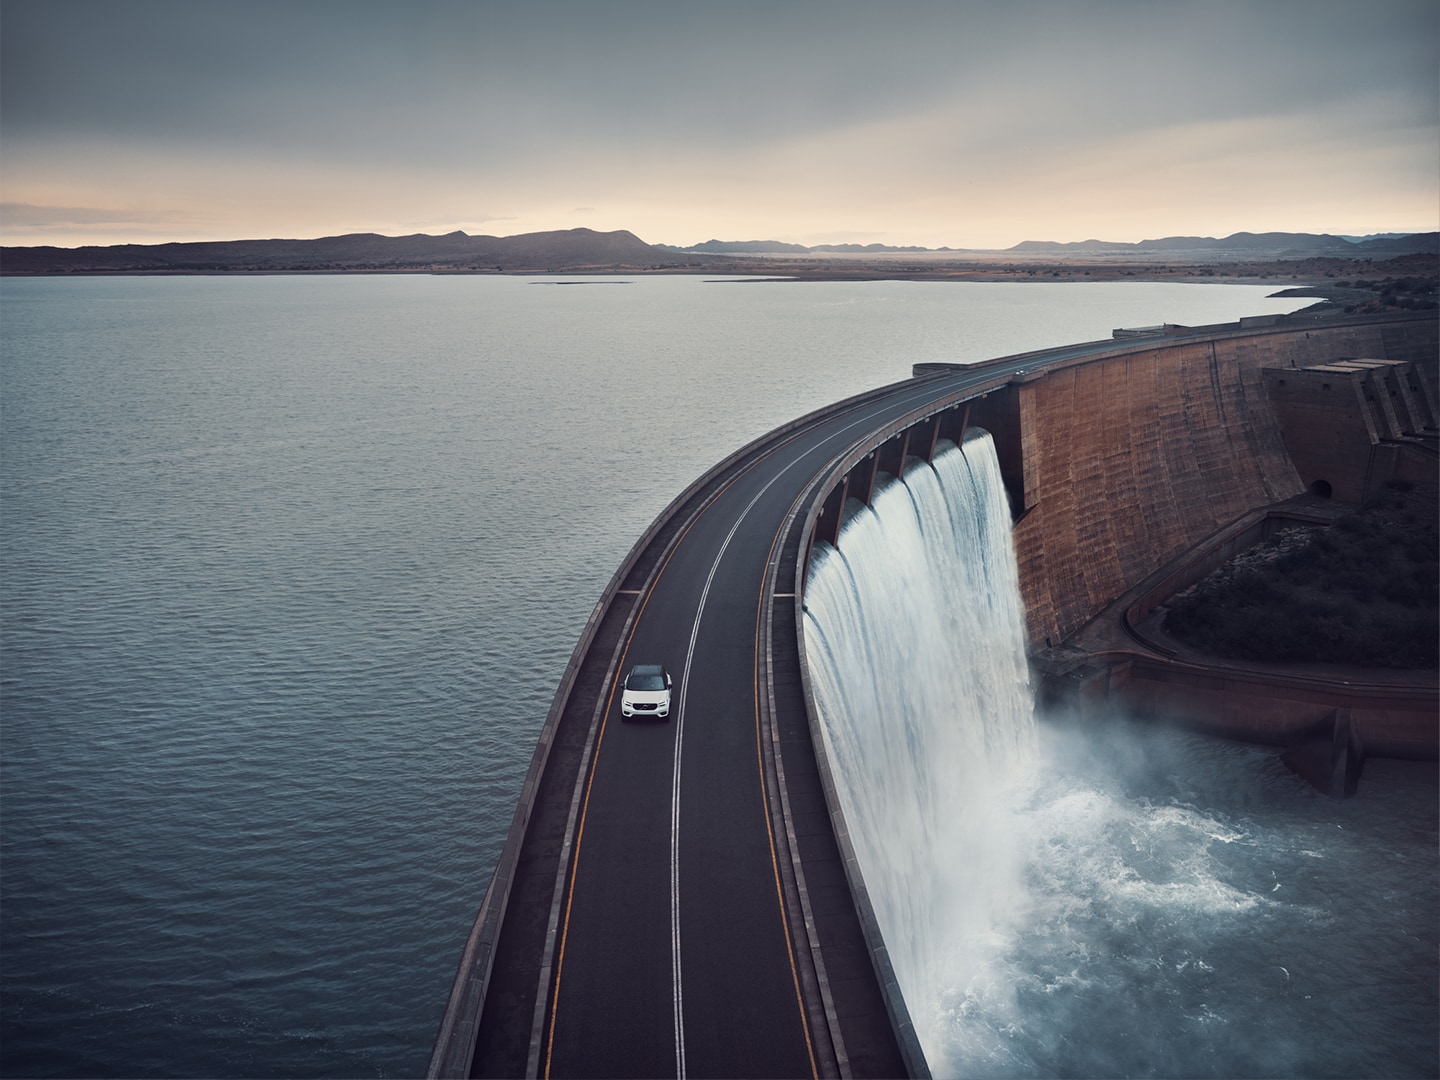 A Volvo SUV driving on a road across a dam holding a reservoir.